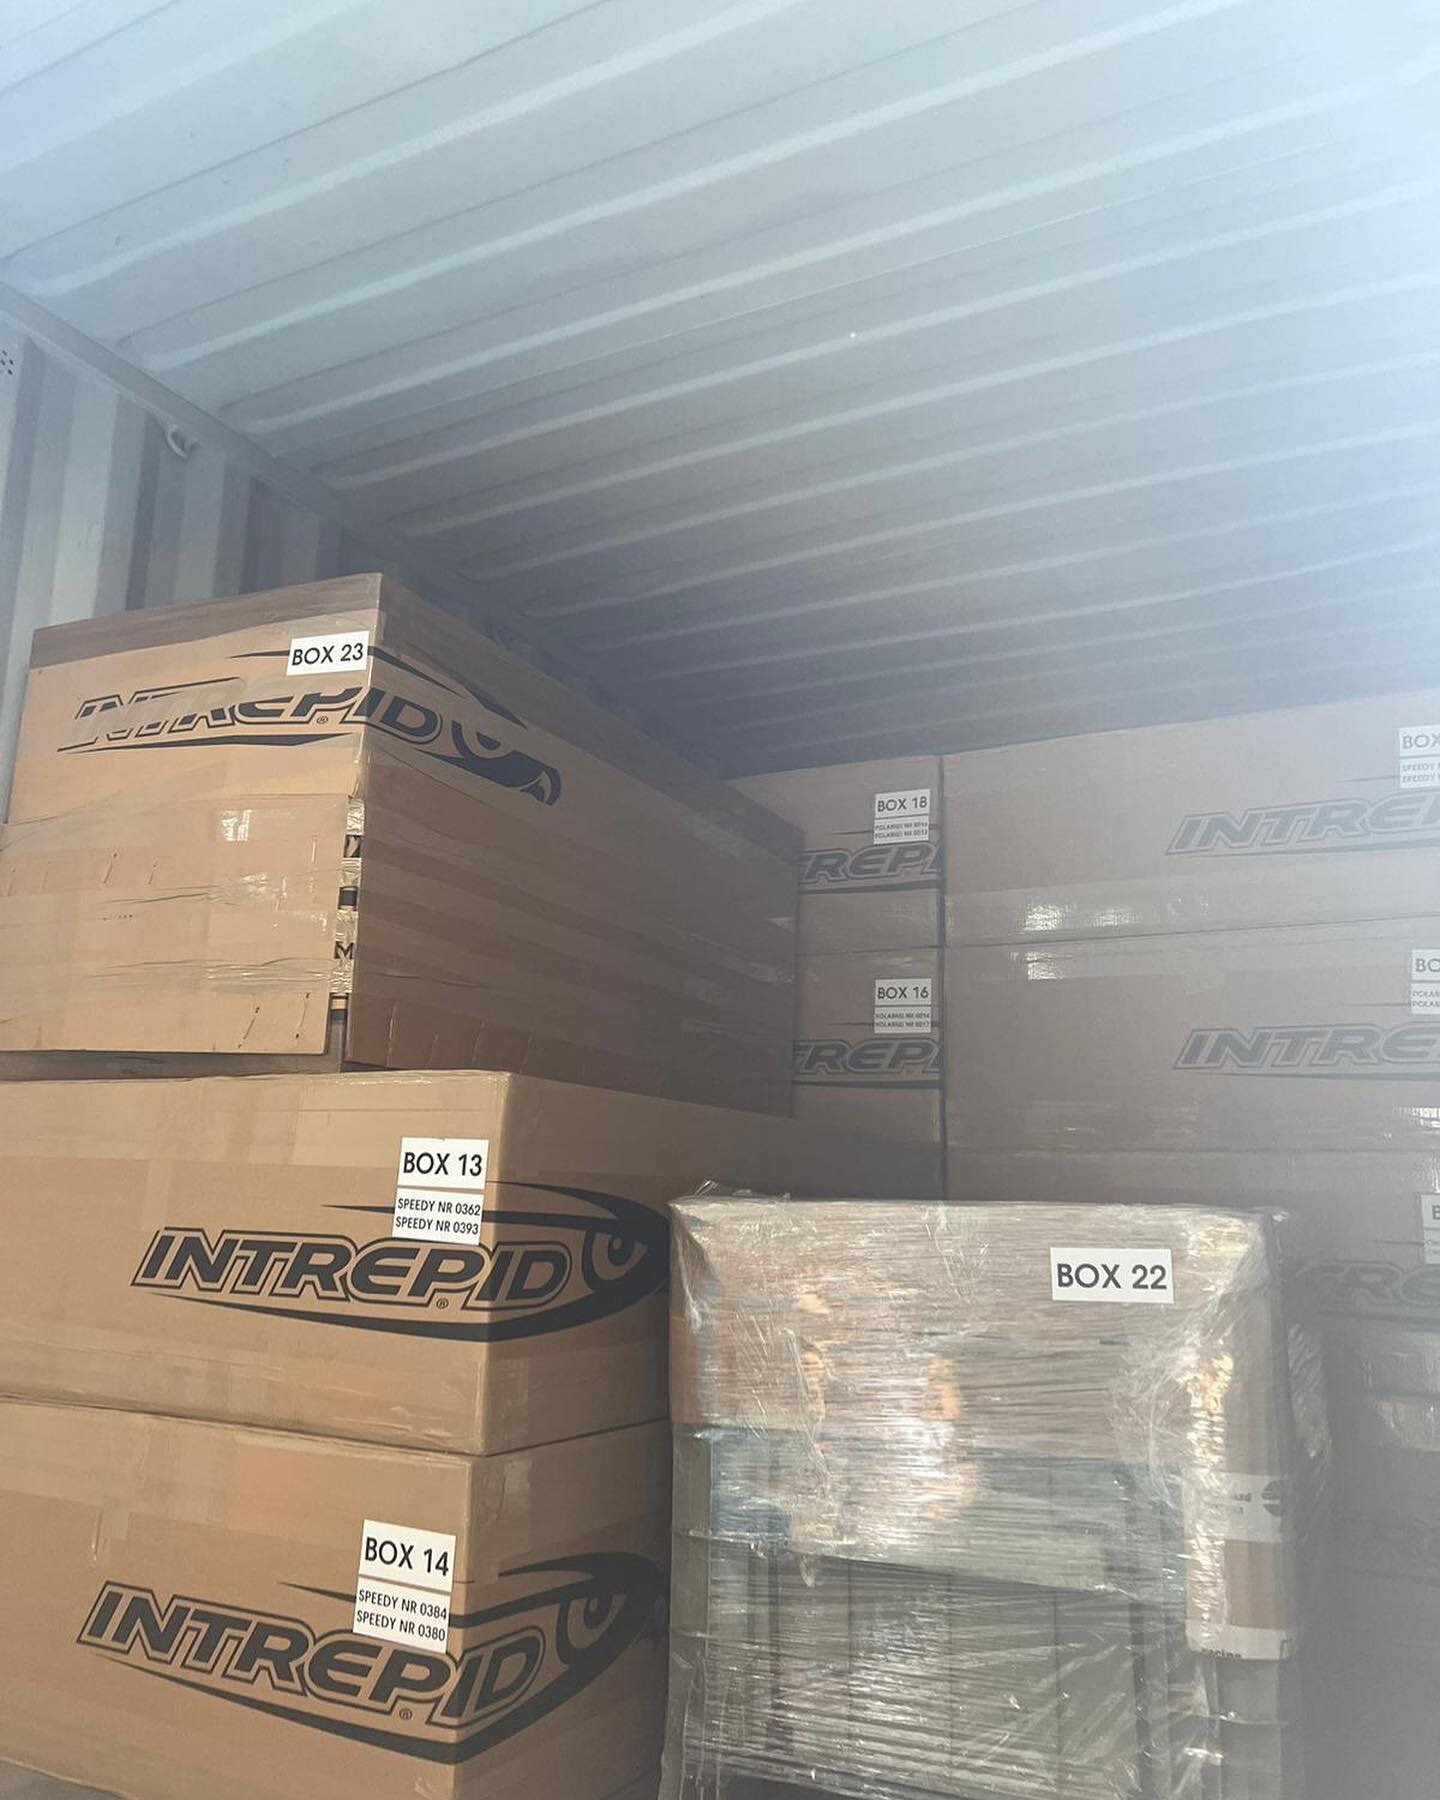 **MaxOrange update**

New karts and a mountain of Intrepid parts have arrived at the WA Port and are waiting for clearance before they are delivered. 😬

#intrepid #speedy #cruiser #maxorange #onelapdifference #keeppushing